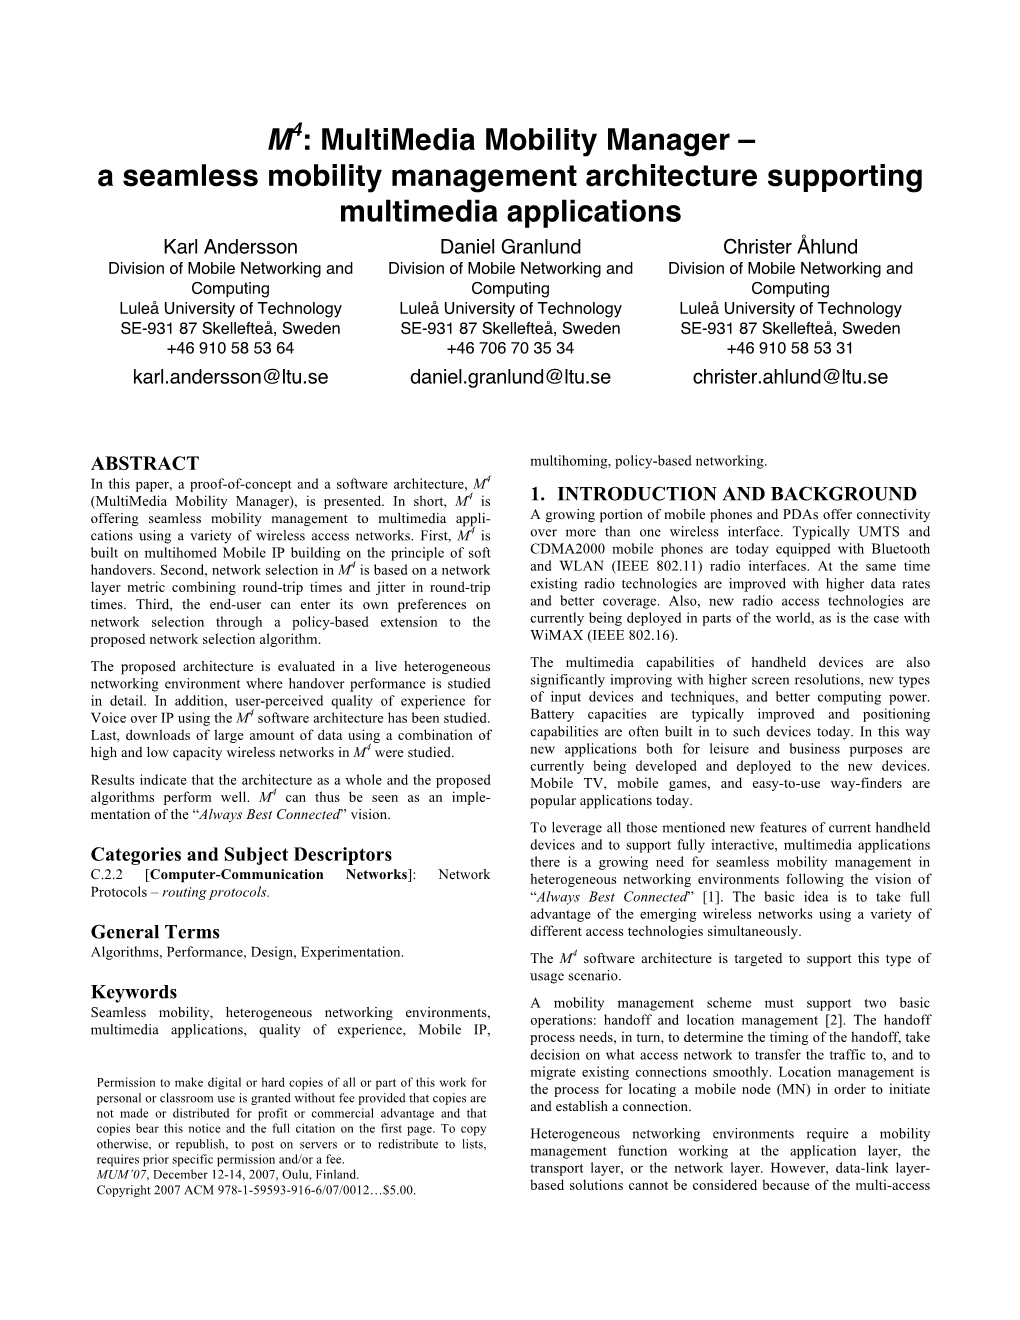 A Seamless Mobility Management Architecture Supporting